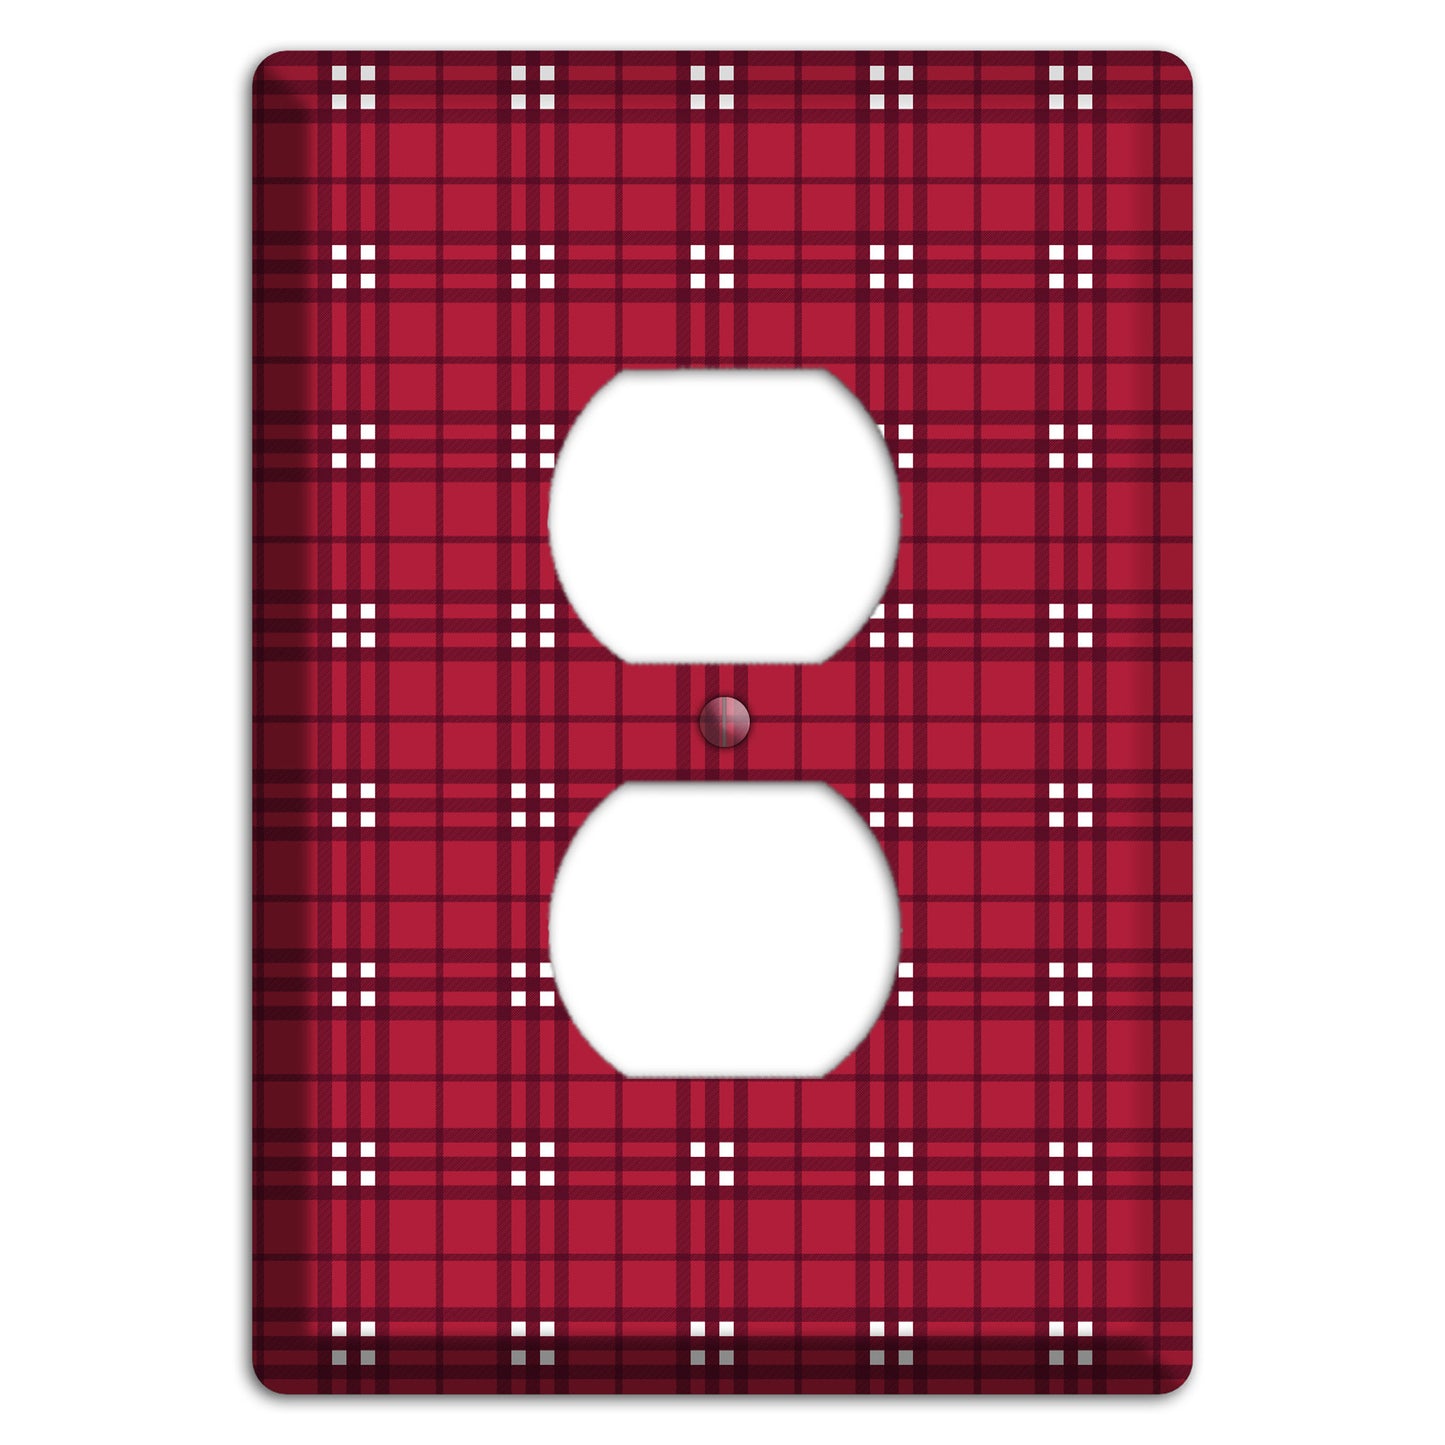 Red and White Plaid Duplex Outlet Wallplate